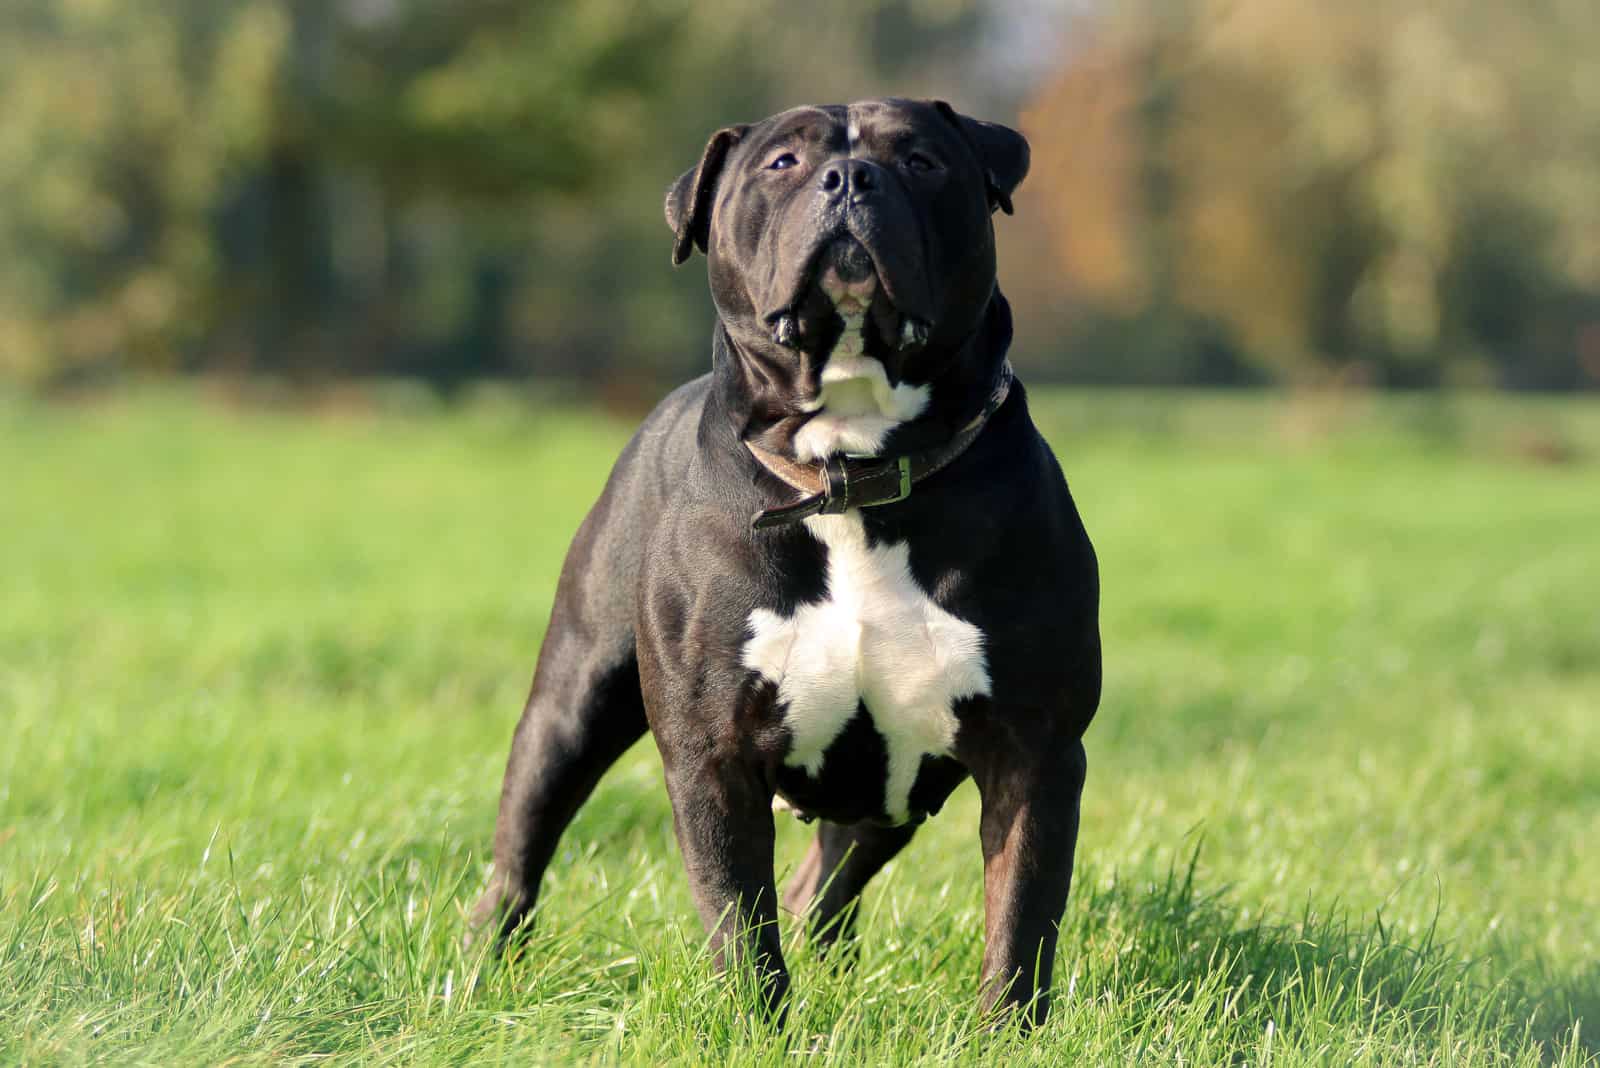 The American Bully stands in the green grass